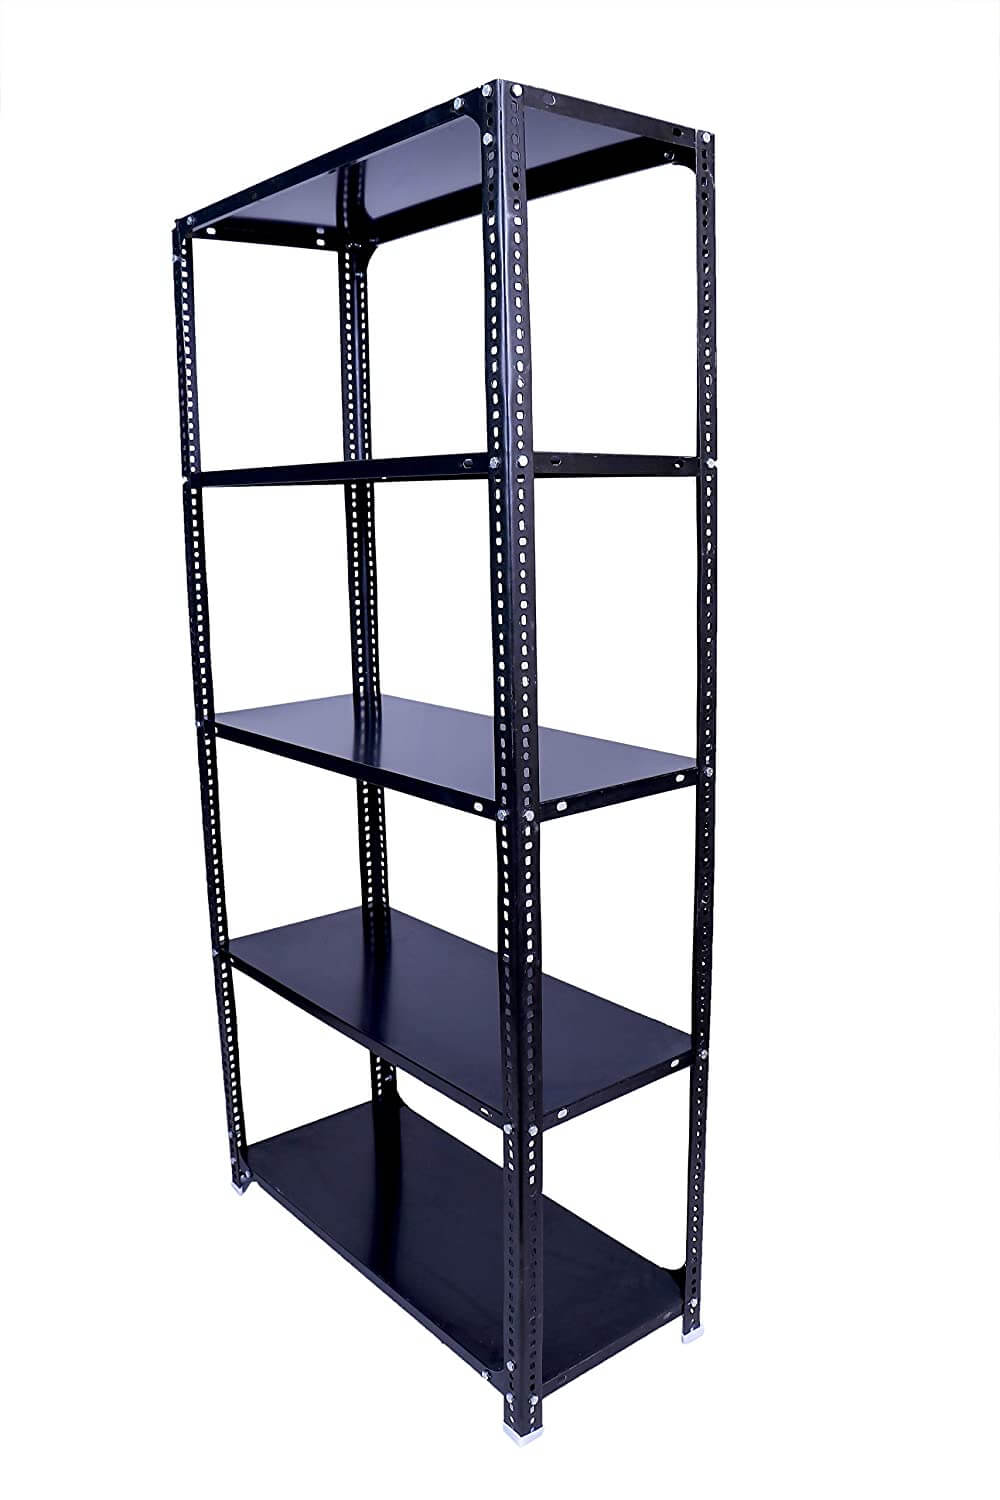 Slotted Angle Racks: Creating A Change In The Storage World